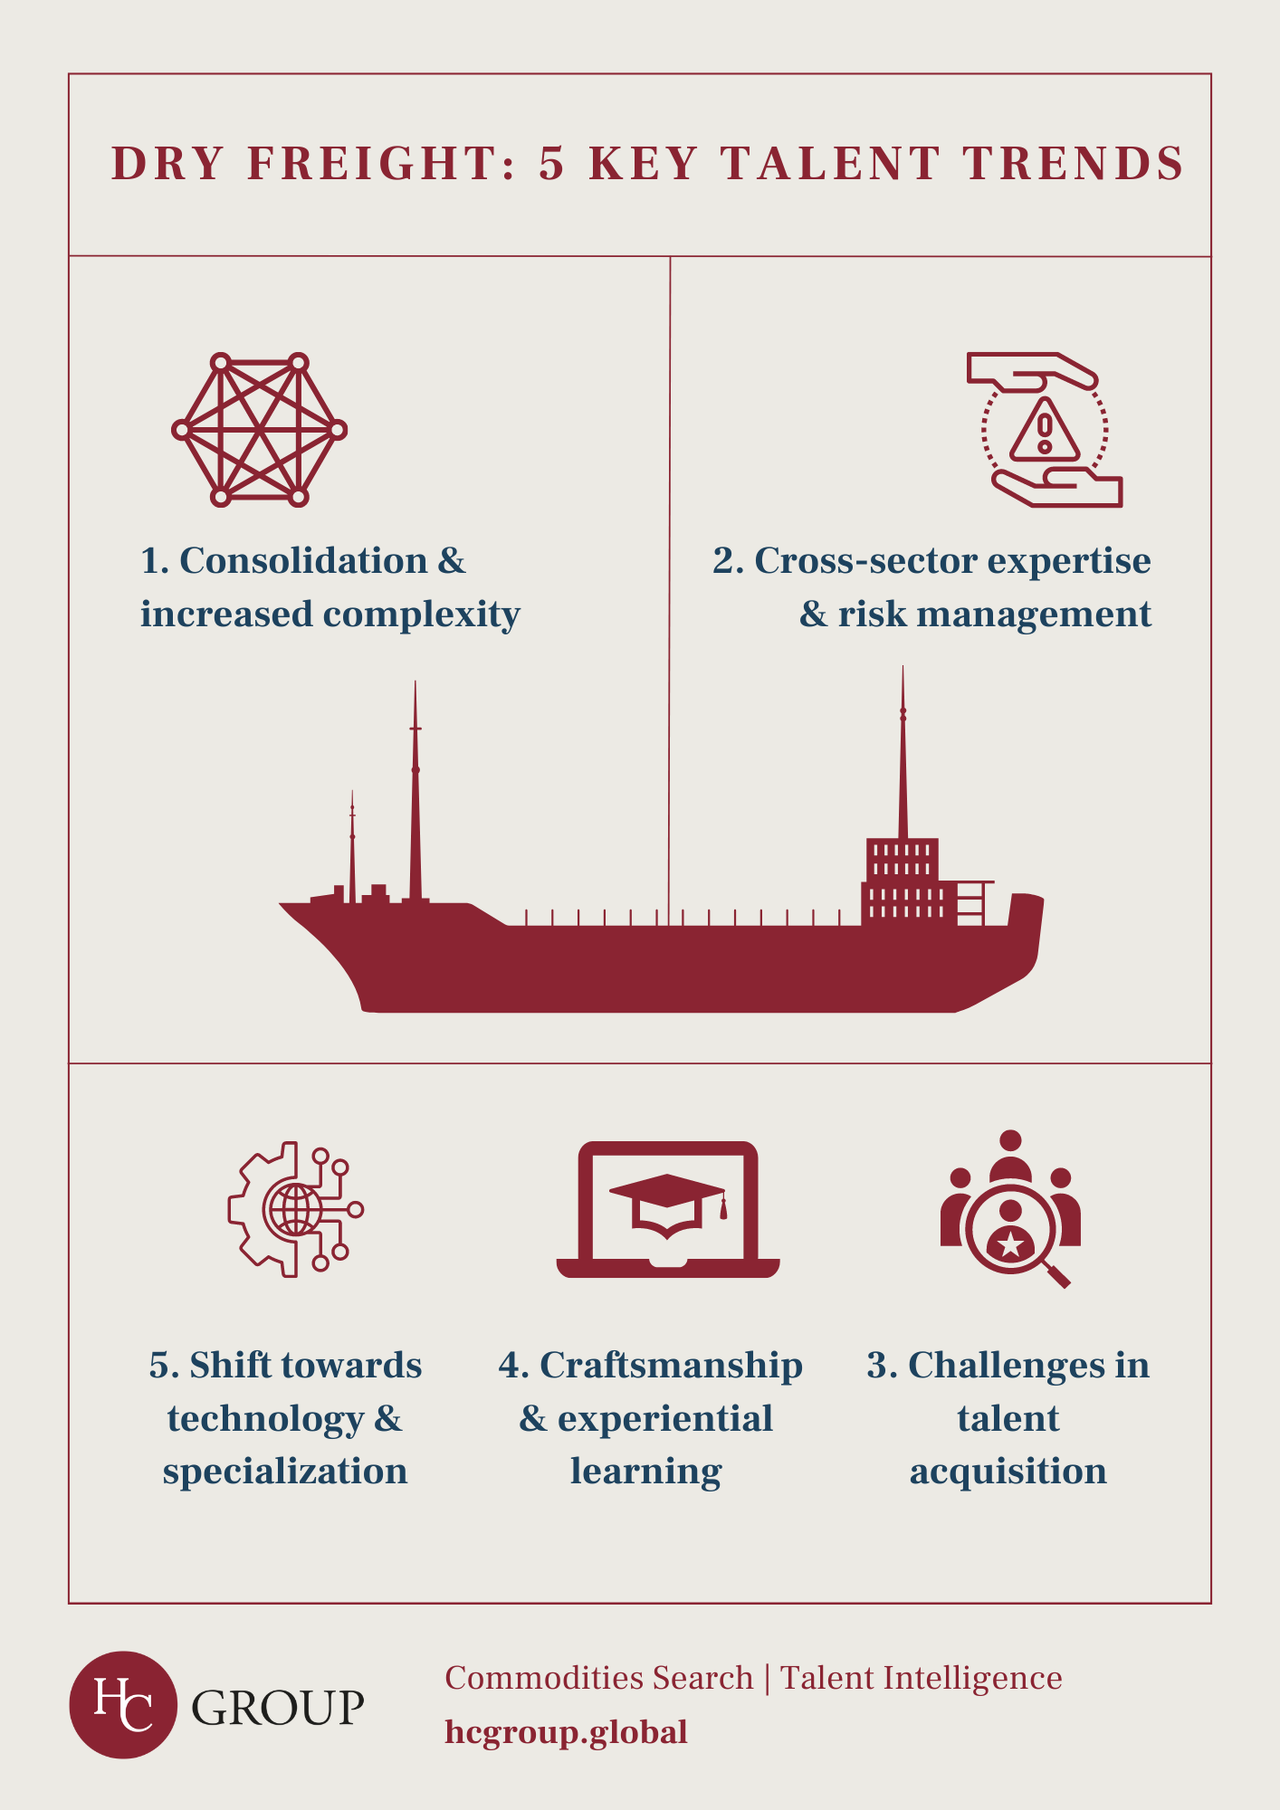 Infographic - 5 key talent trends in dry freight